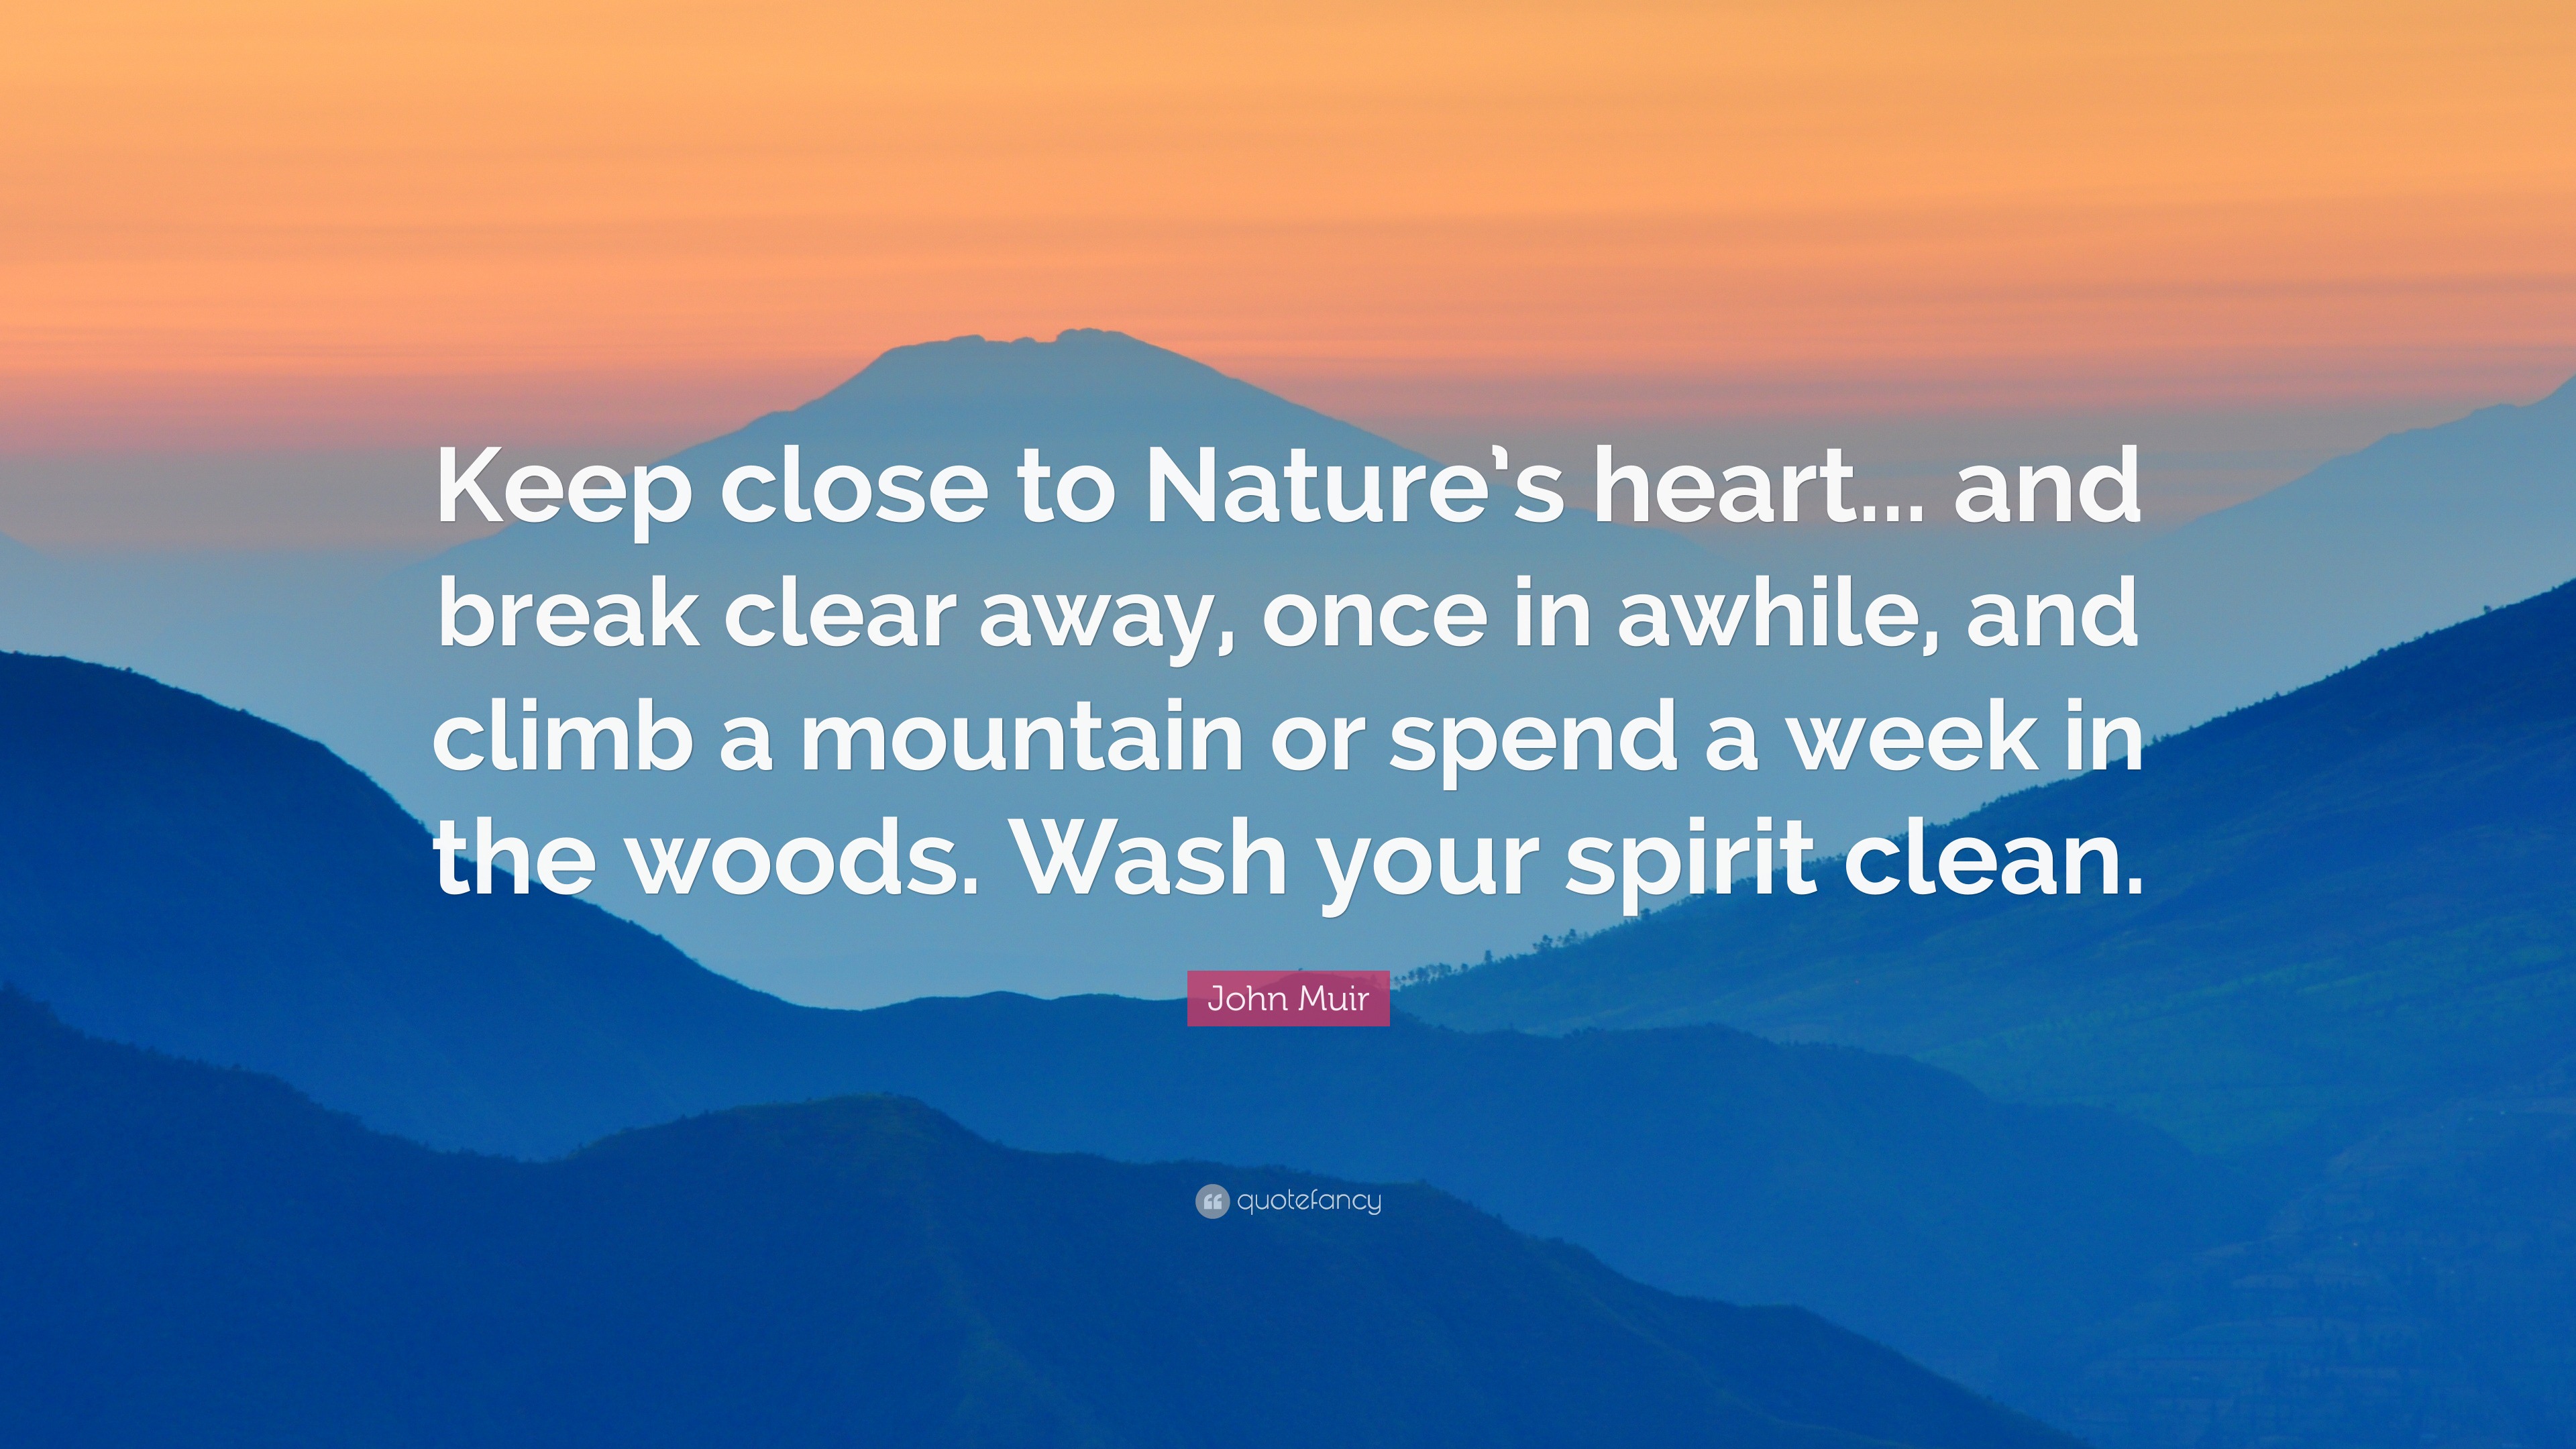 John Muir Quote: “Keep close to Nature’s heart... and break clear away